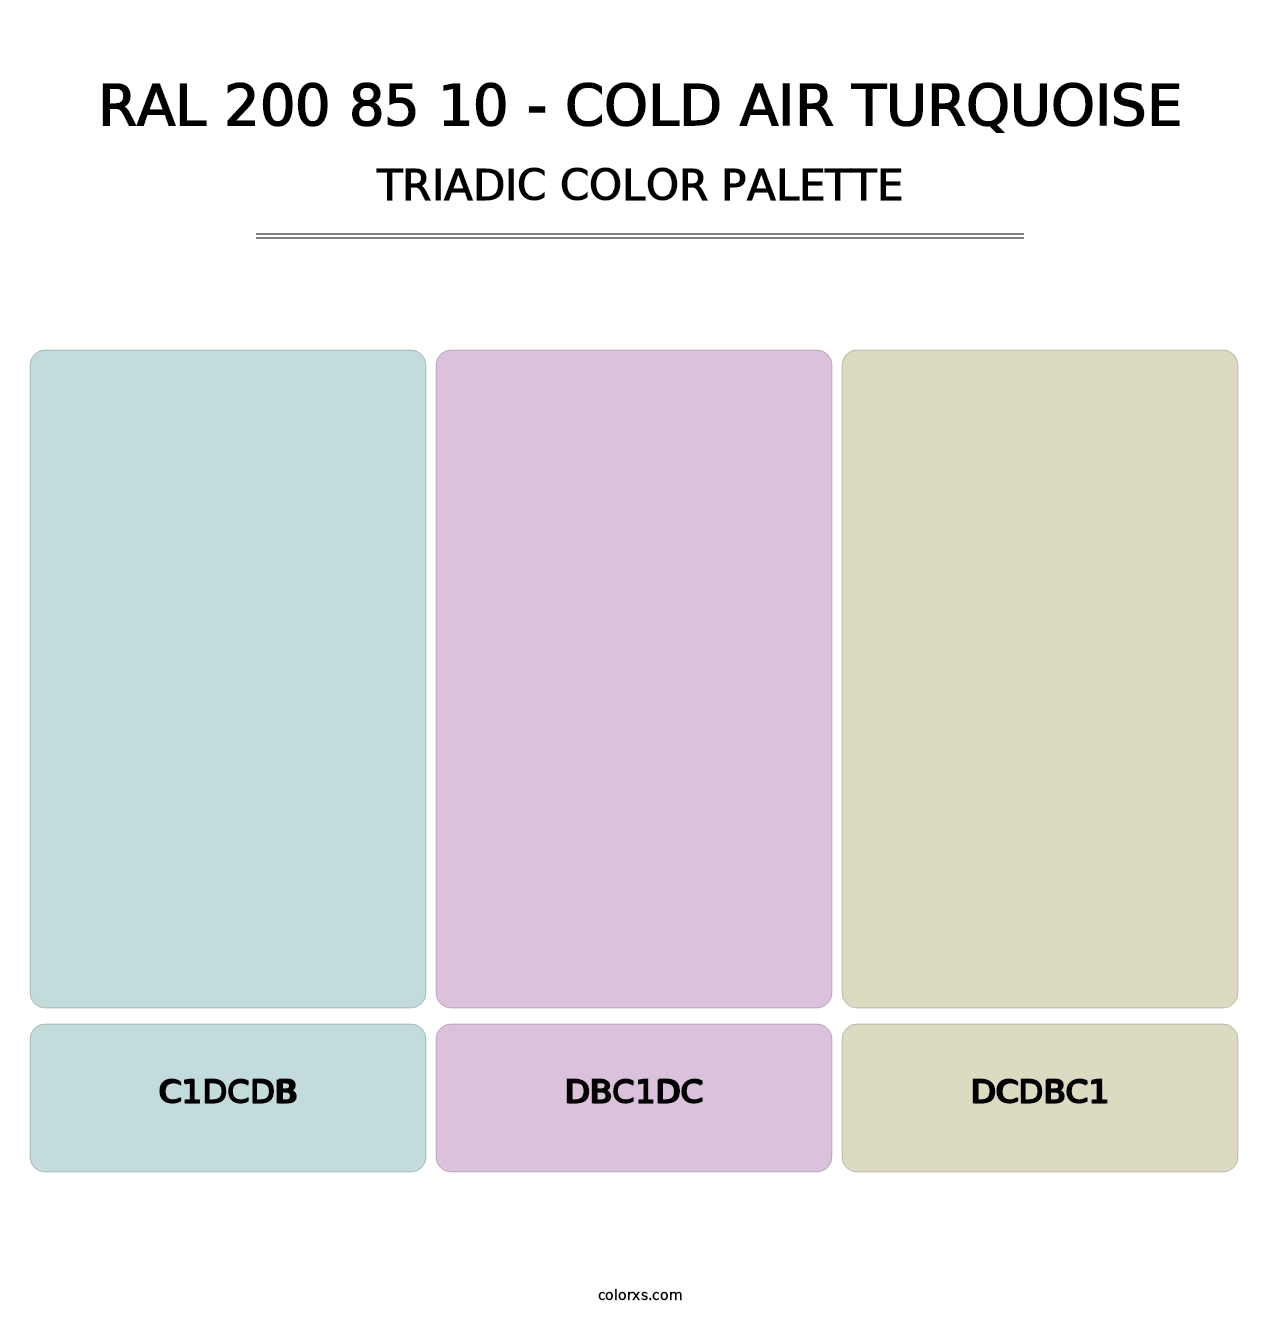 RAL 200 85 10 - Cold Air Turquoise - Triadic Color Palette